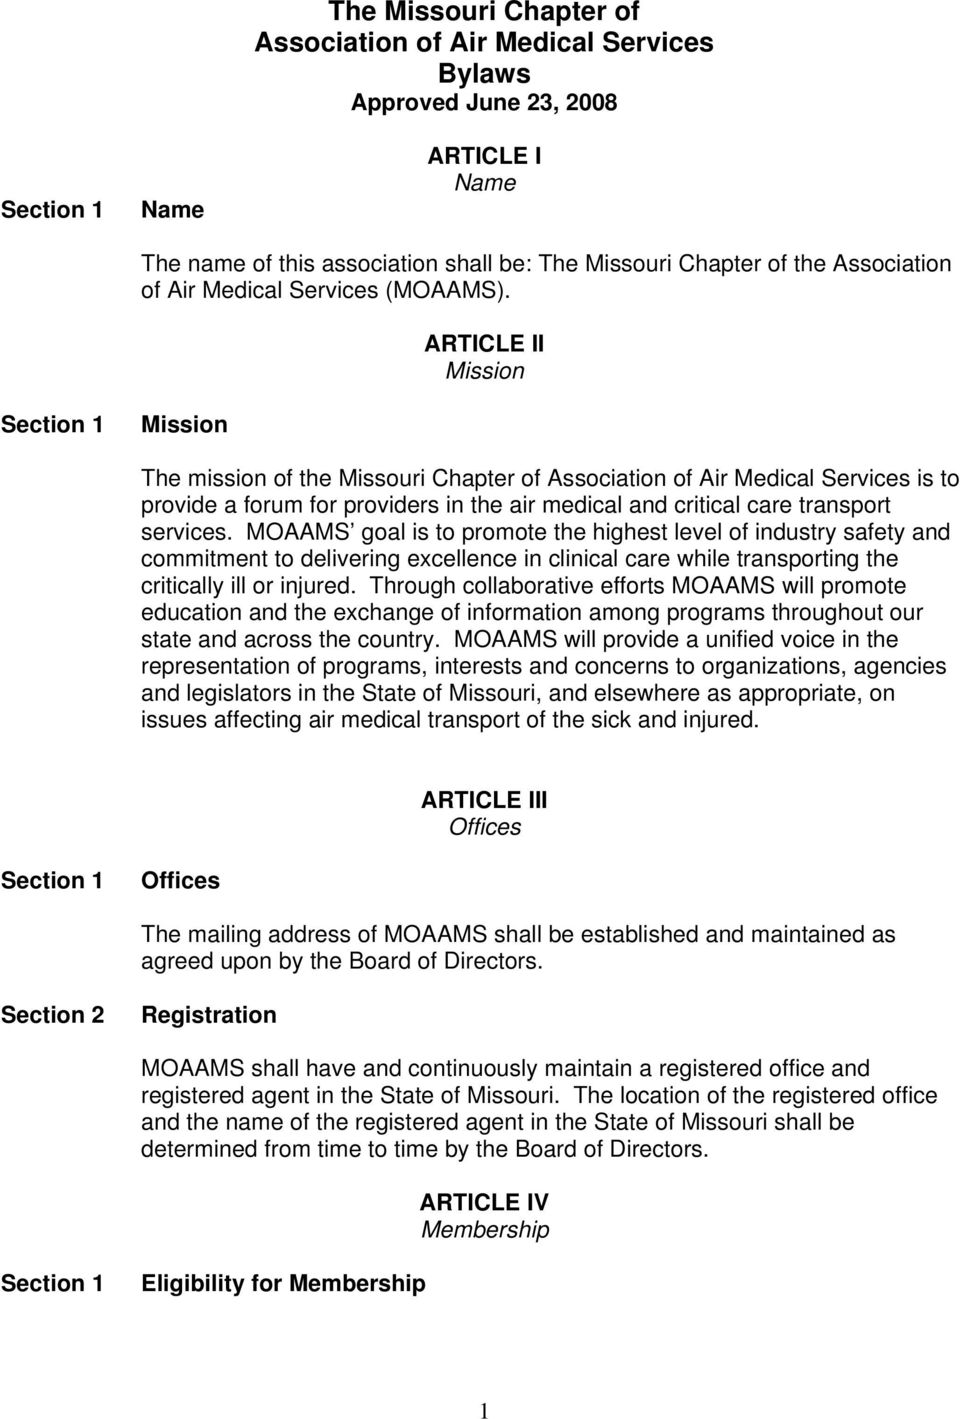 ARTICLE II Mission Mission The mission of the Missouri Chapter of Association of Air Medical Services is to provide a forum for providers in the air medical and critical care transport services.